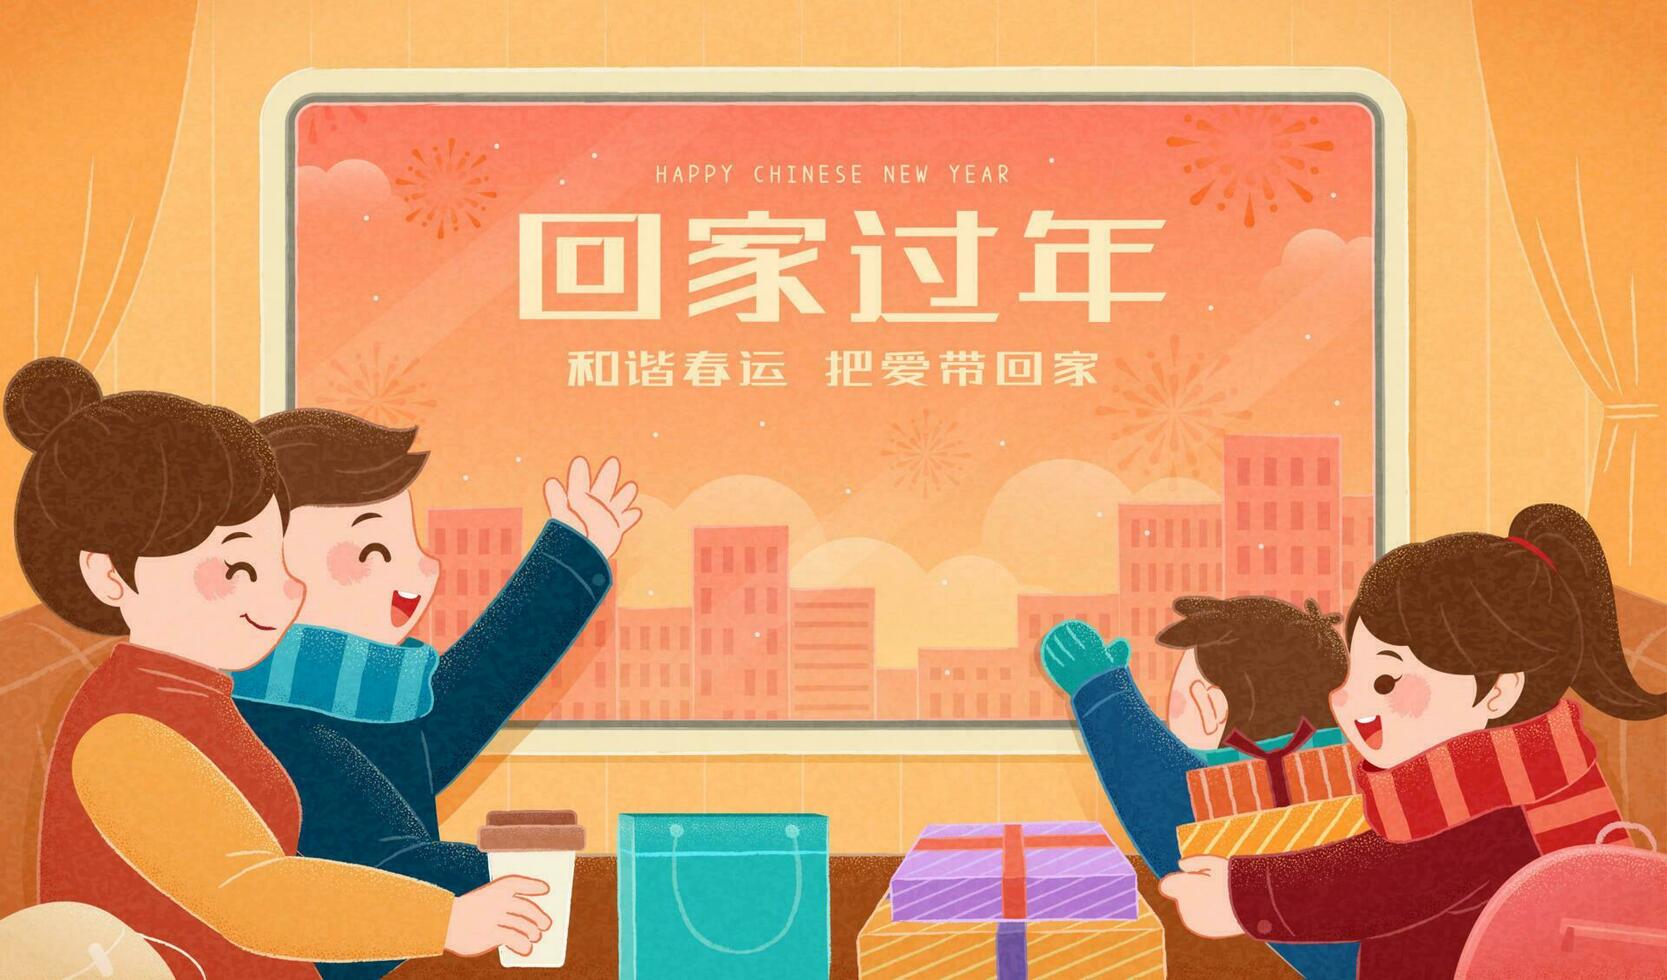 Chinese New Year travel rush illustration with cute family sitting on train, Translation, Return home and enjoy family reunion, Travel safely and bring love back to our family vector